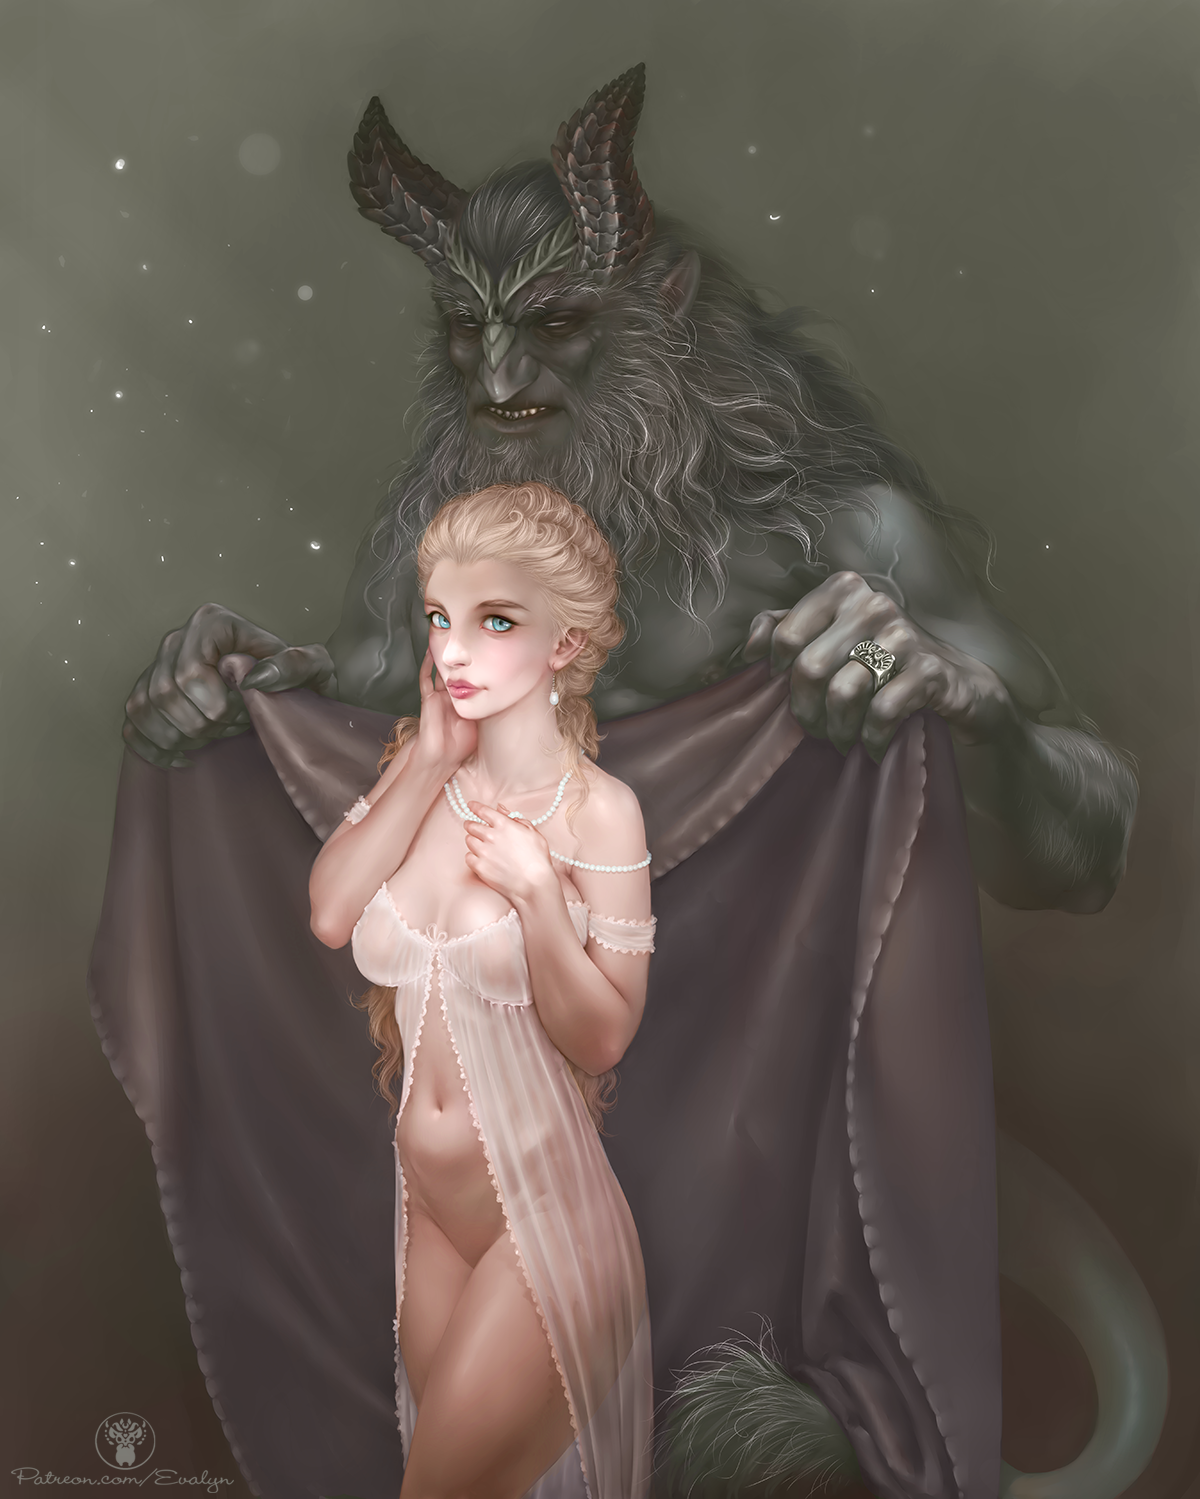 Belle - NSFW, My, Story, Krampus, Drawing, Digital drawing, The beauty and the Beast, Fantasy, Girls, Monster